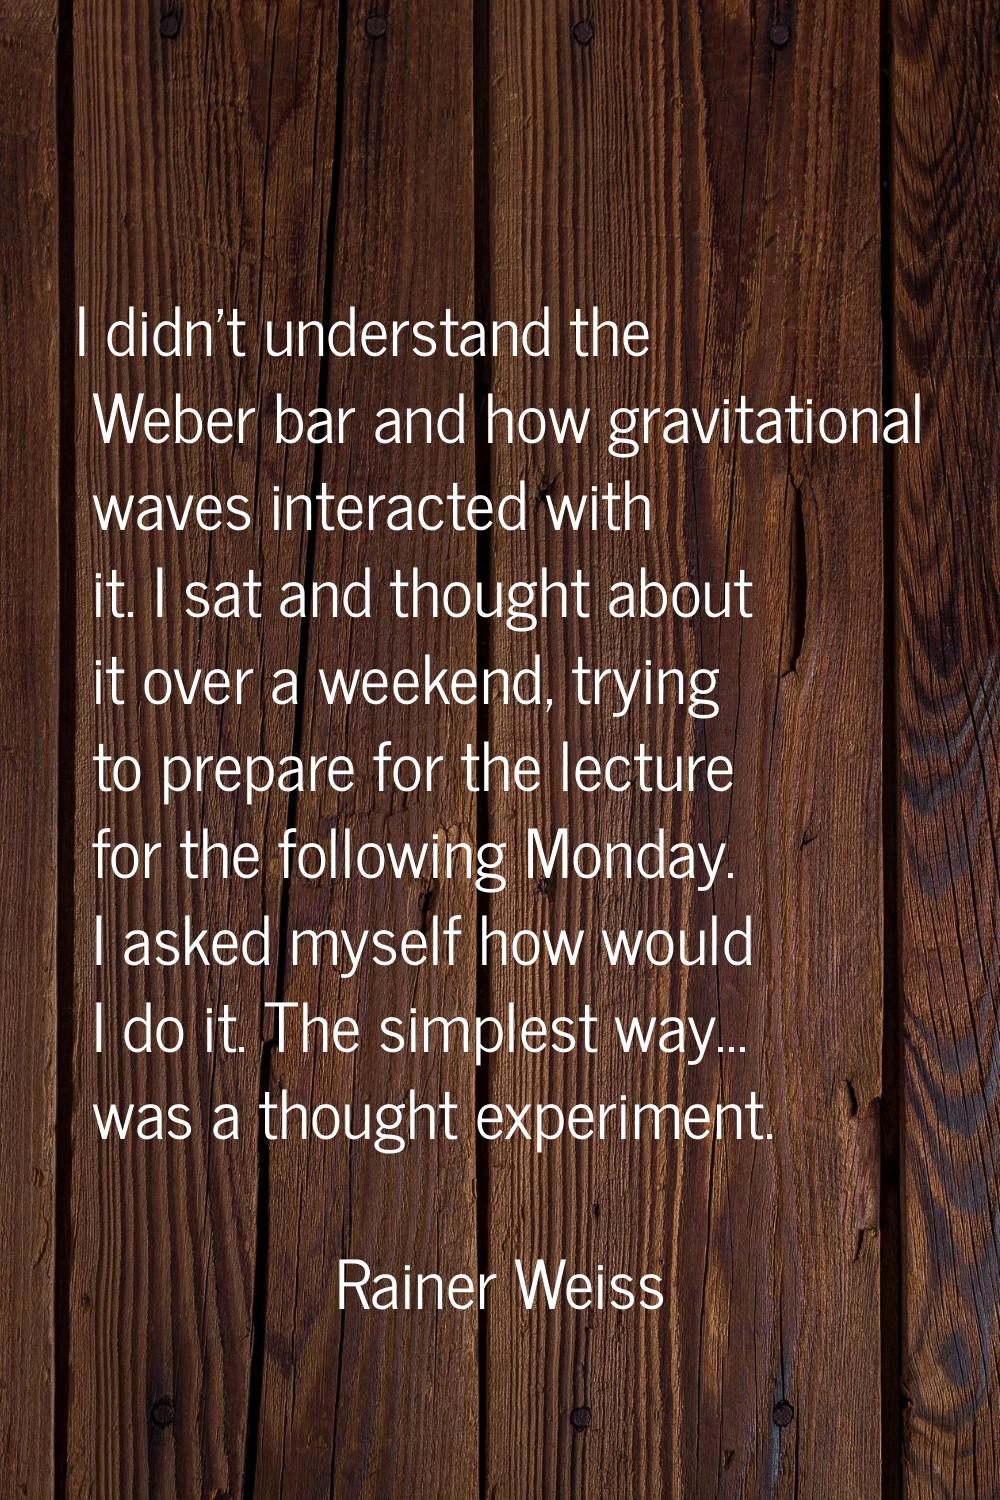 I didn't understand the Weber bar and how gravitational waves interacted with it. I sat and thought